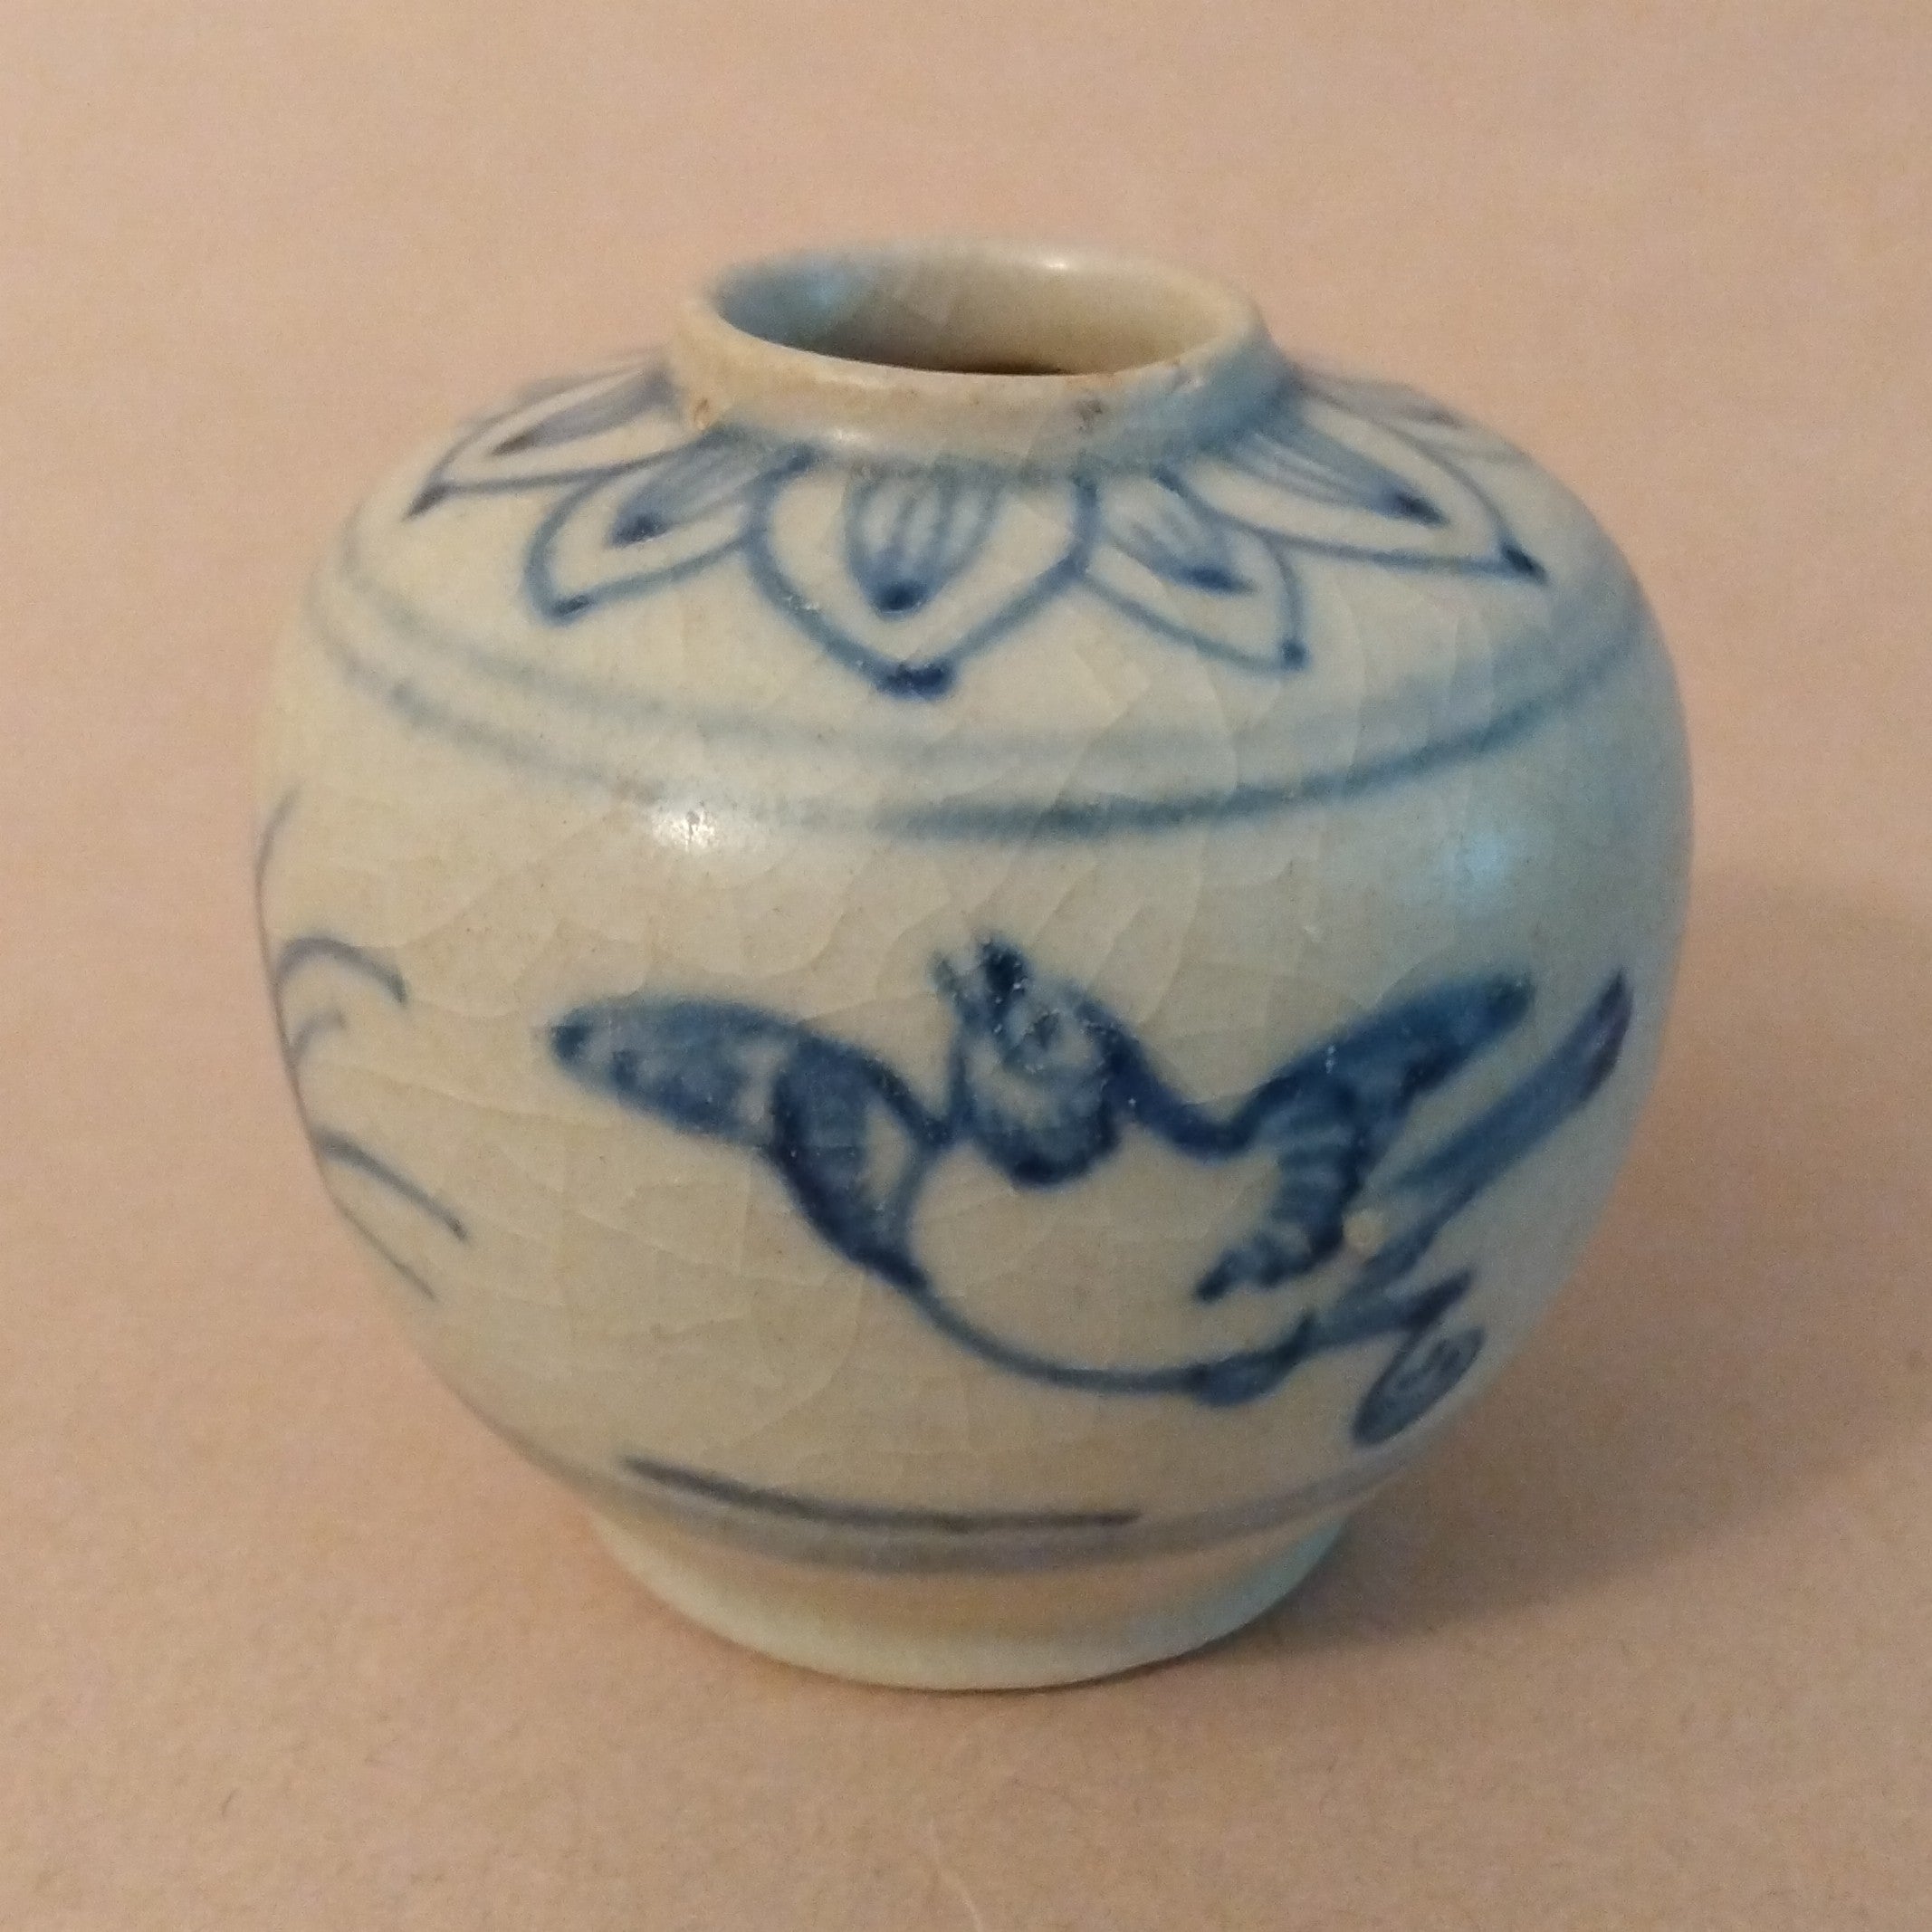 Ceramic Jarlet with underglaze cobalt blue decoration of birds and grasses on the body and lotus petals around the shoulders. Vietnam, ca. 15-17th C